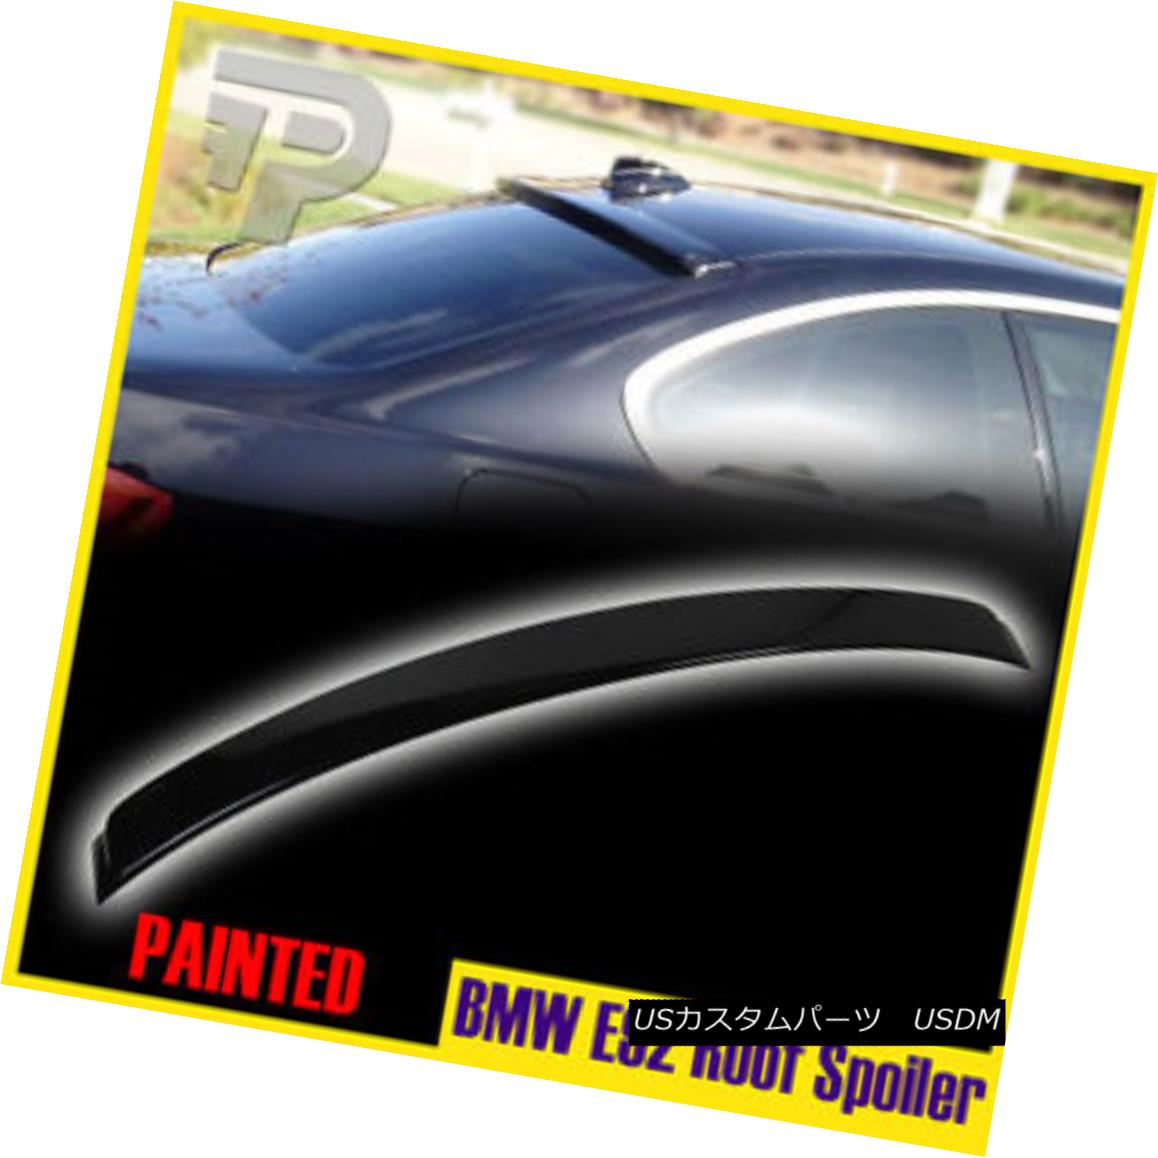 ѡ Painted #475 Spoiler Rear Roof Wing 07-13 BMW E92 M3 2D Coupe A-Type 335i 325i Ѥߡ475ݥ顼ꥢ롼ե07-13 BMW E92 M3 2DA335i 325i